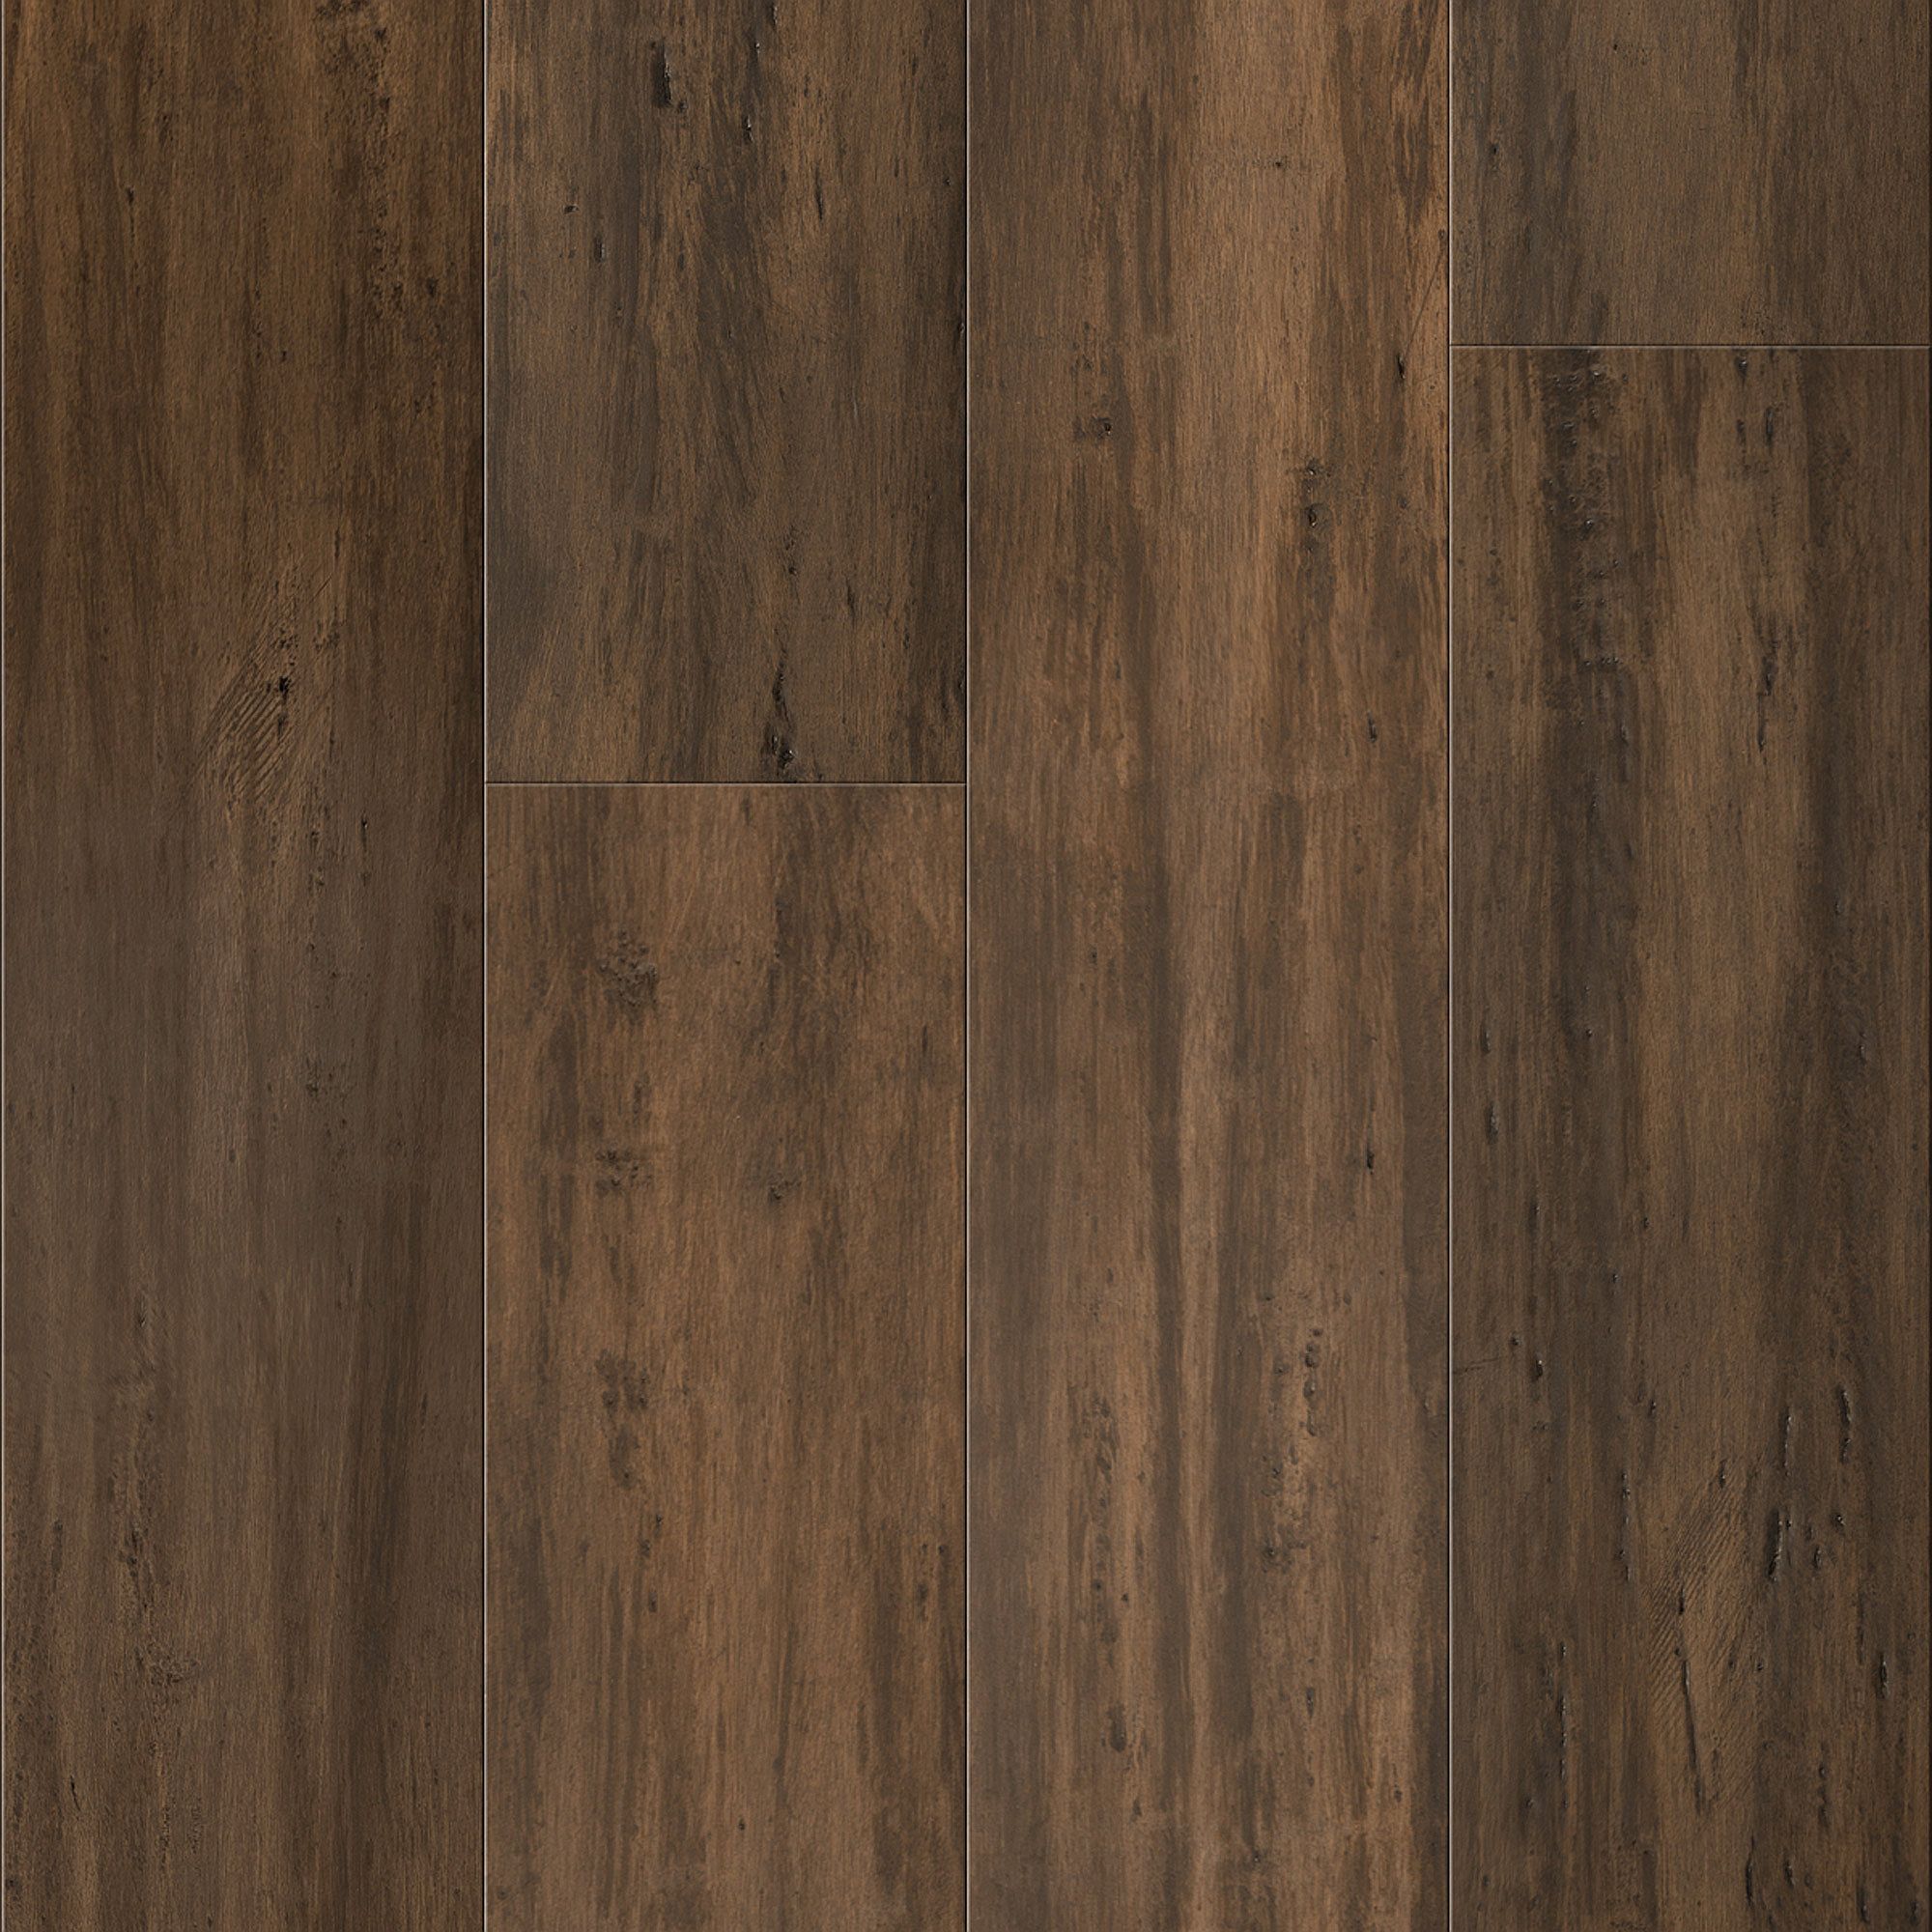 CALI Fossilized Natural Bamboo 5-5/16-in W x 9/16-in T Smooth/Traditional  Engineered Hardwood Flooring (21.5-sq ft) at